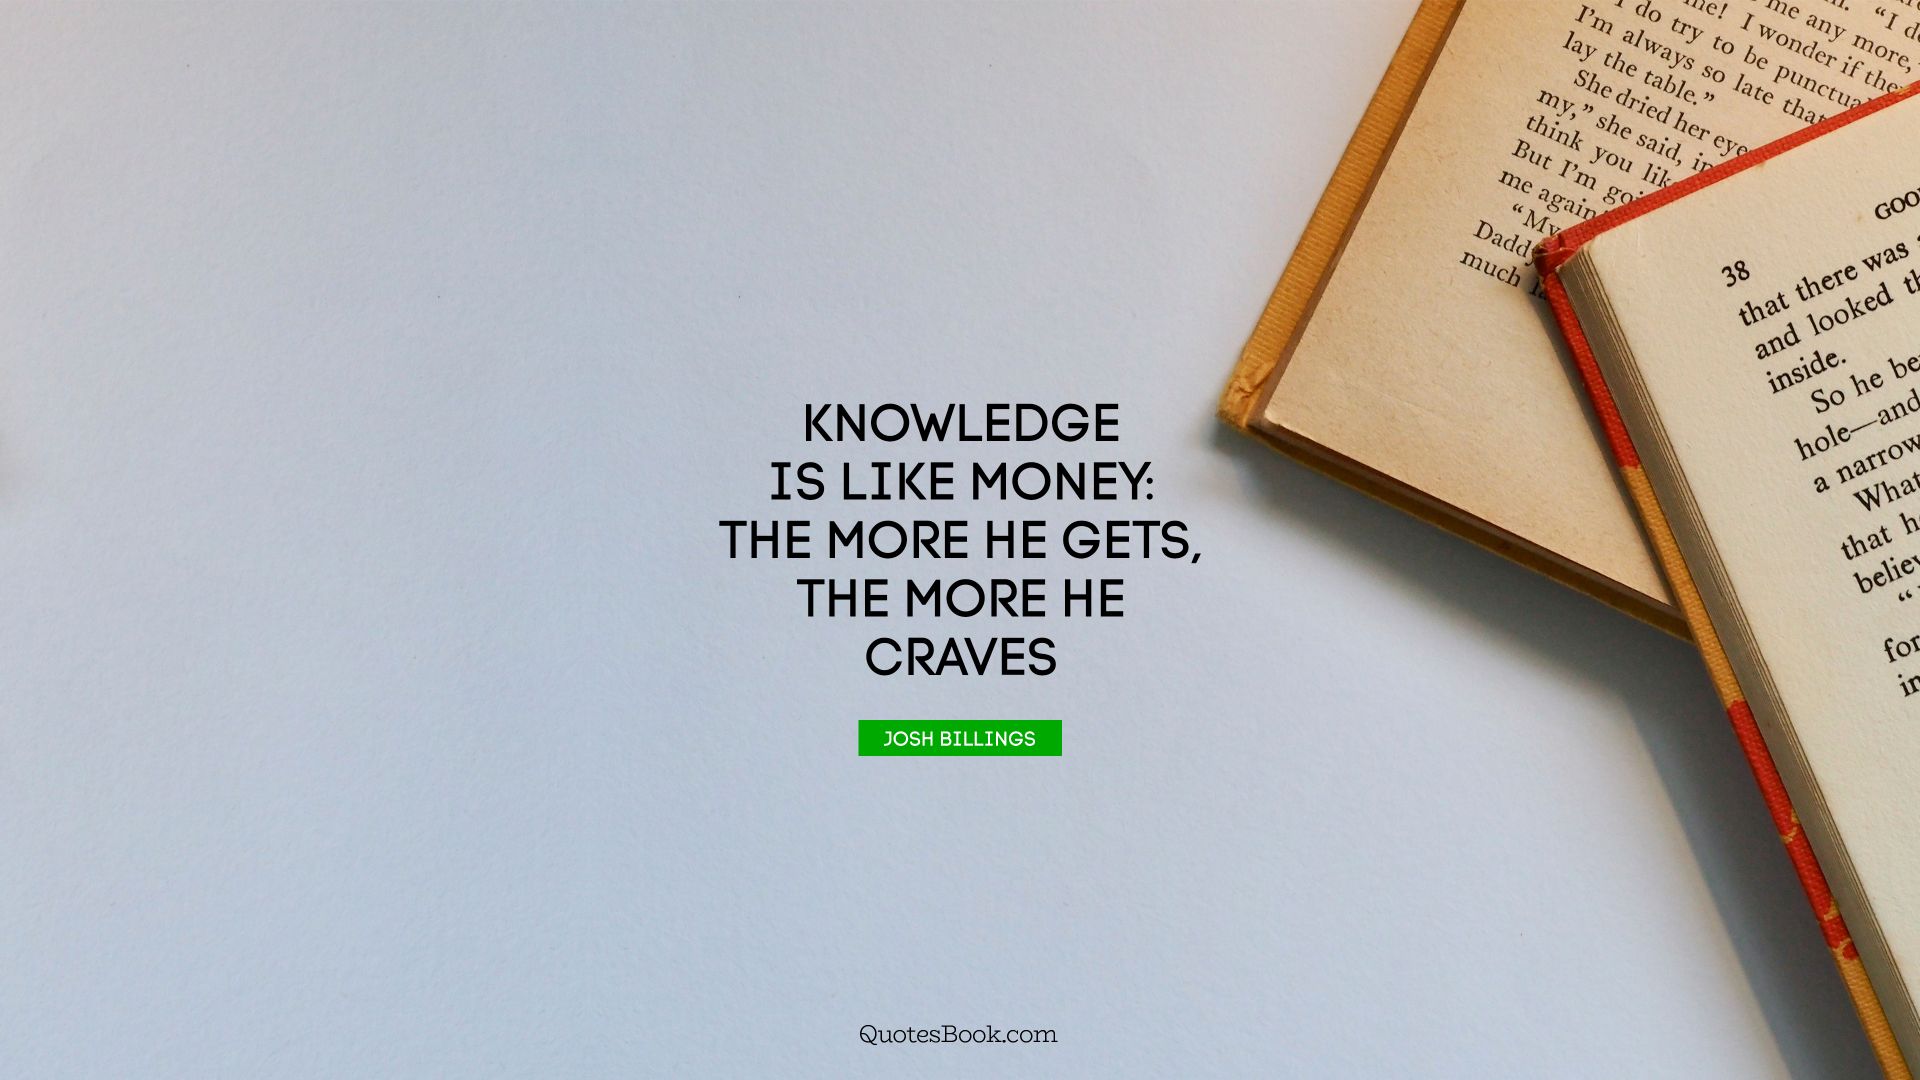 Knowledge is like money: the more he gets, the more he craves. - Quote by Josh Billings